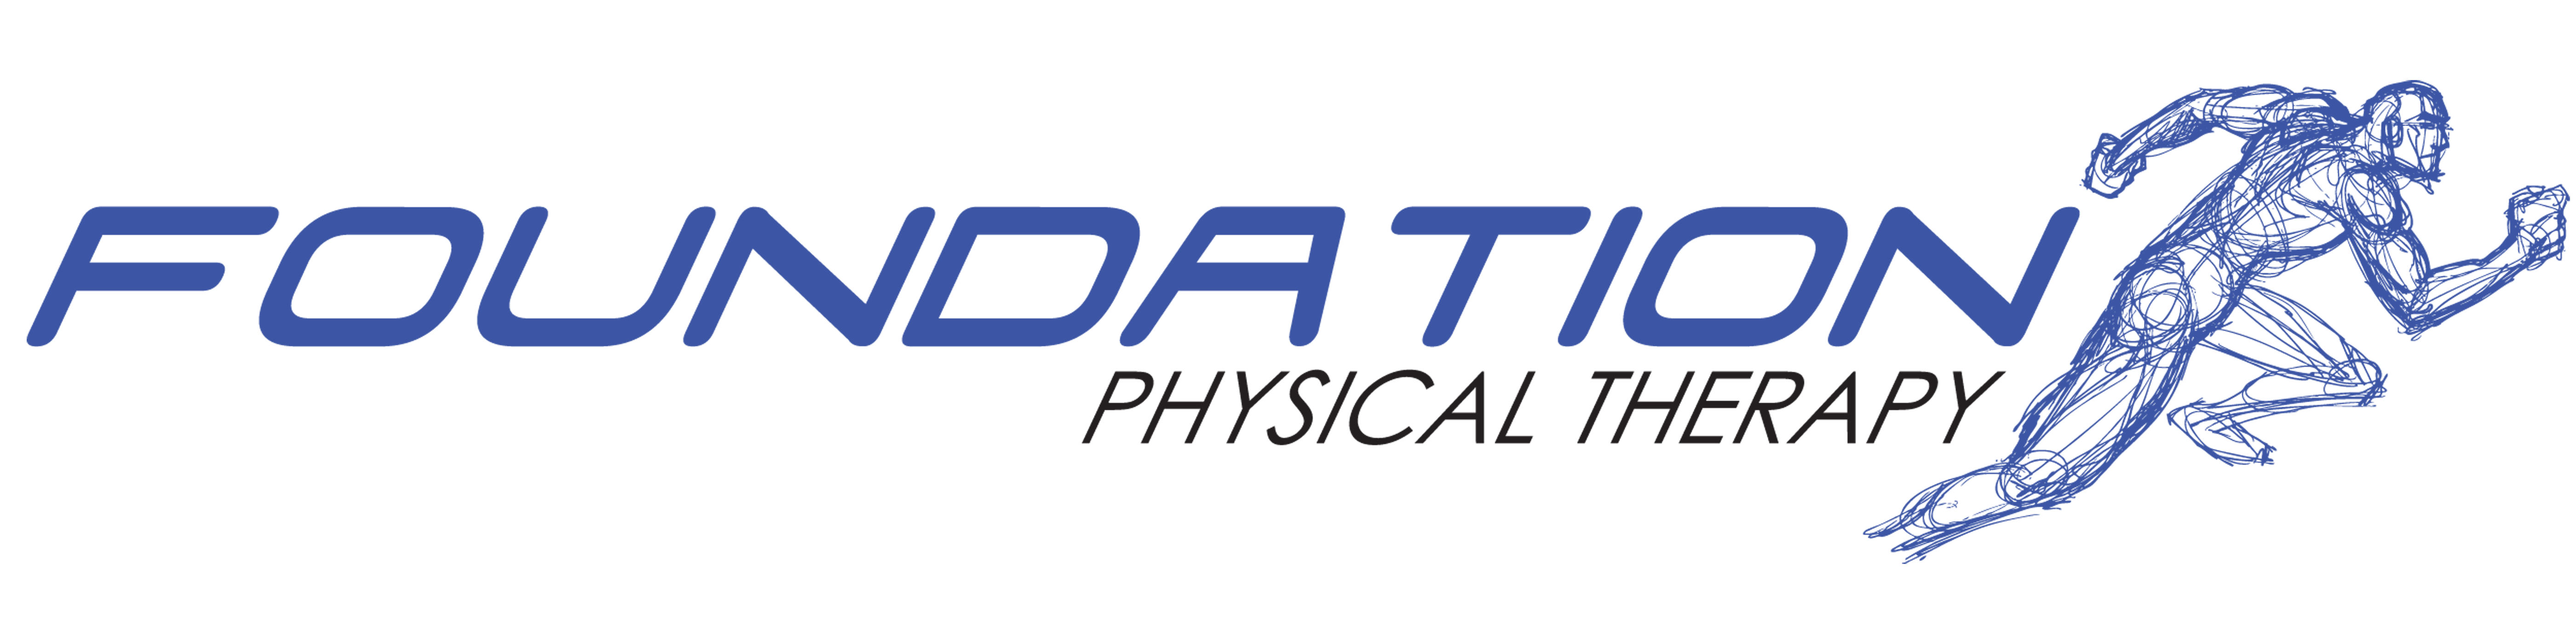 Foundation Physical Therapy Logo